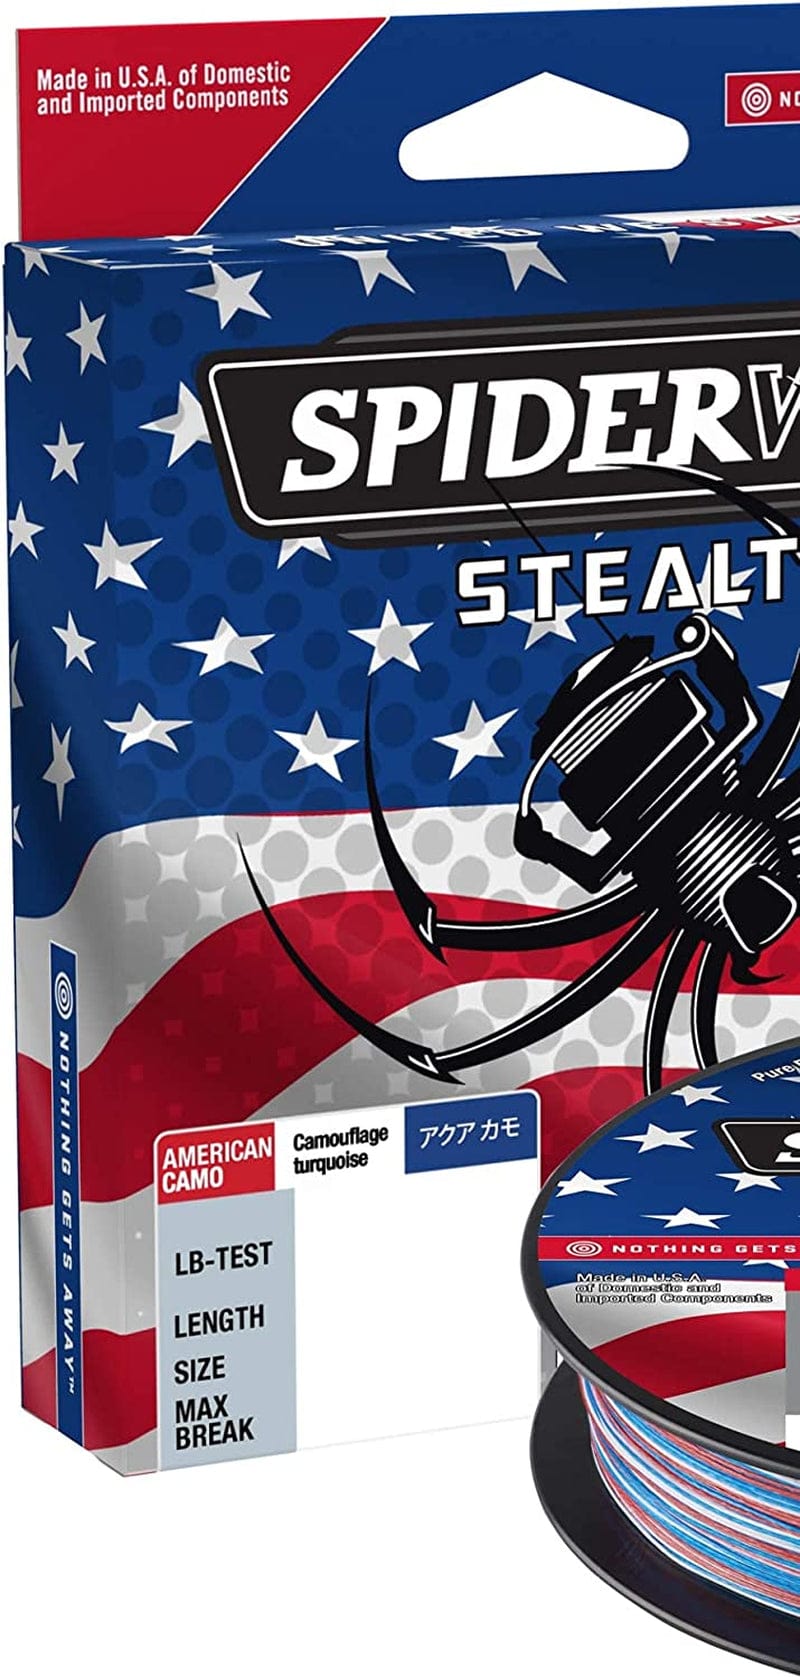 Spiderwire Stealth Braid Fishing Line Sporting Goods > Outdoor Recreation > Fishing > Fishing Lines & Leaders Pure Fishing   